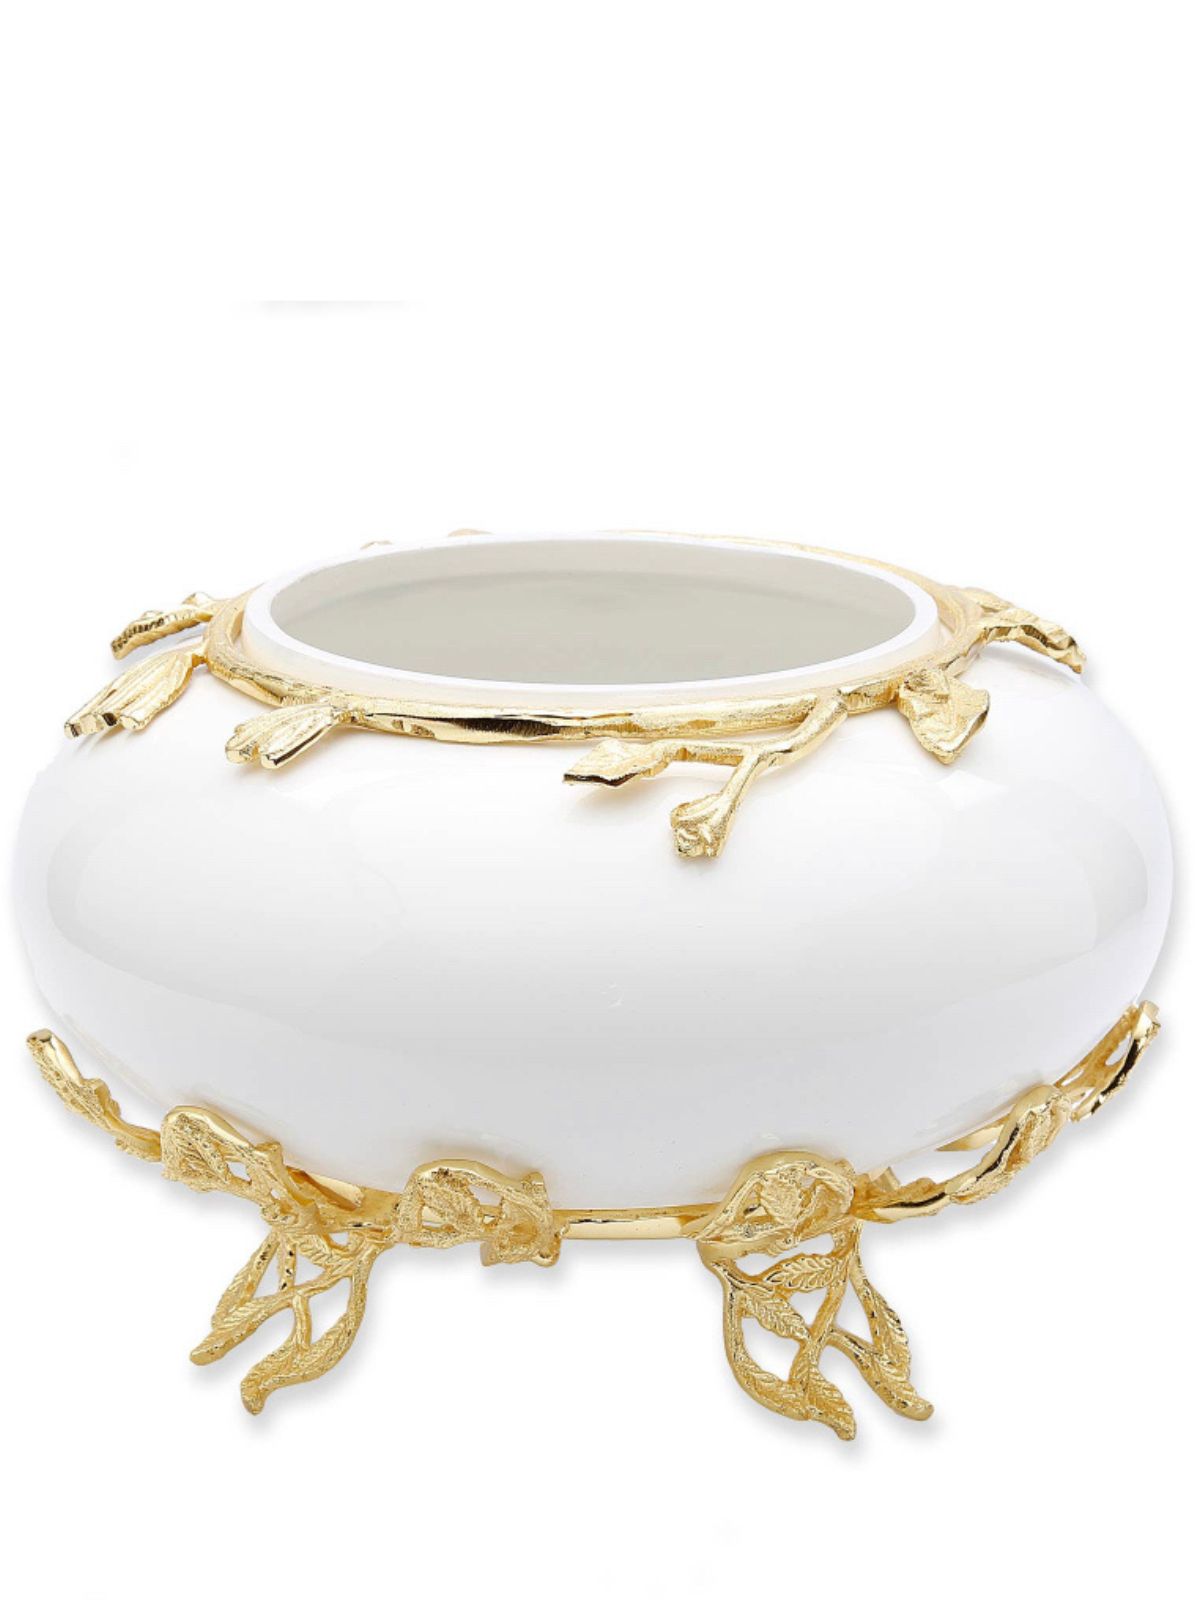 White Glass Bowl Footed On a Luxurious Gold Leaf Base, 10D x 6H.